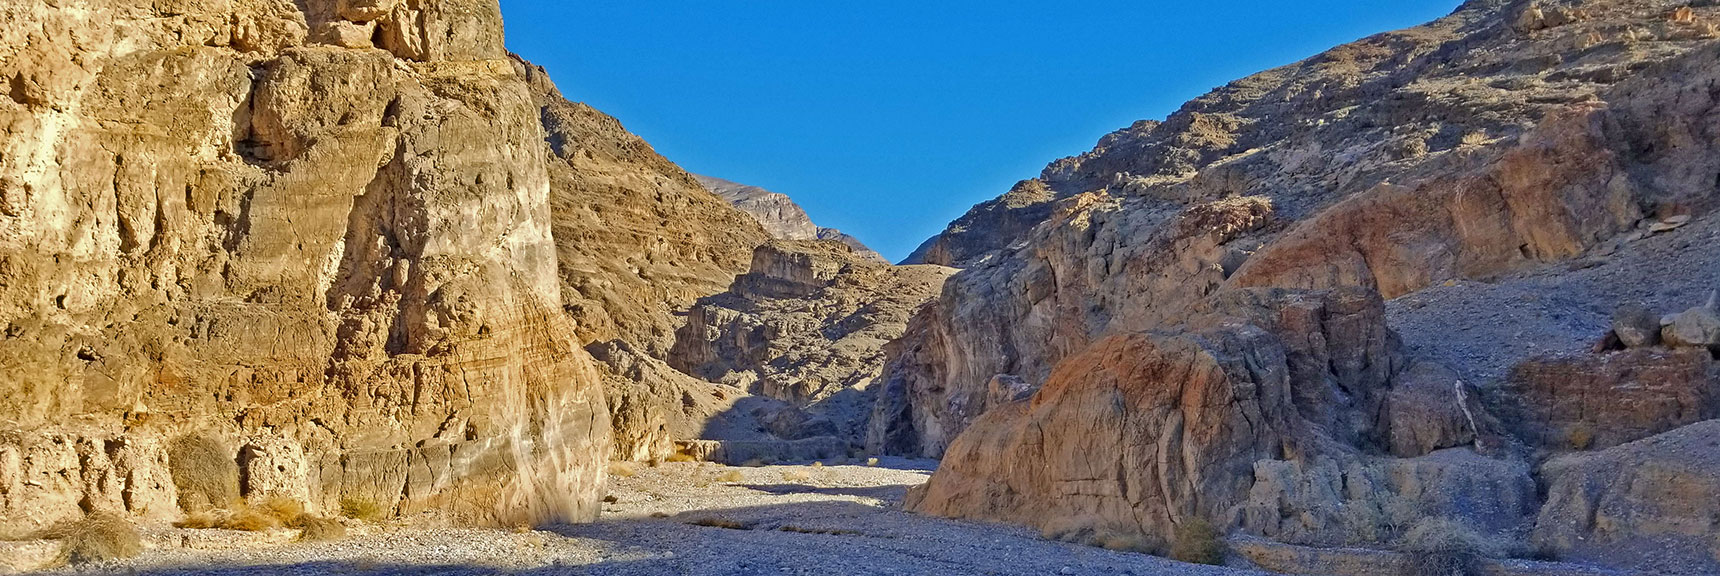 Entering the Mouth of Fall Canyon | Fall Canyon | Death Valley National Park, California